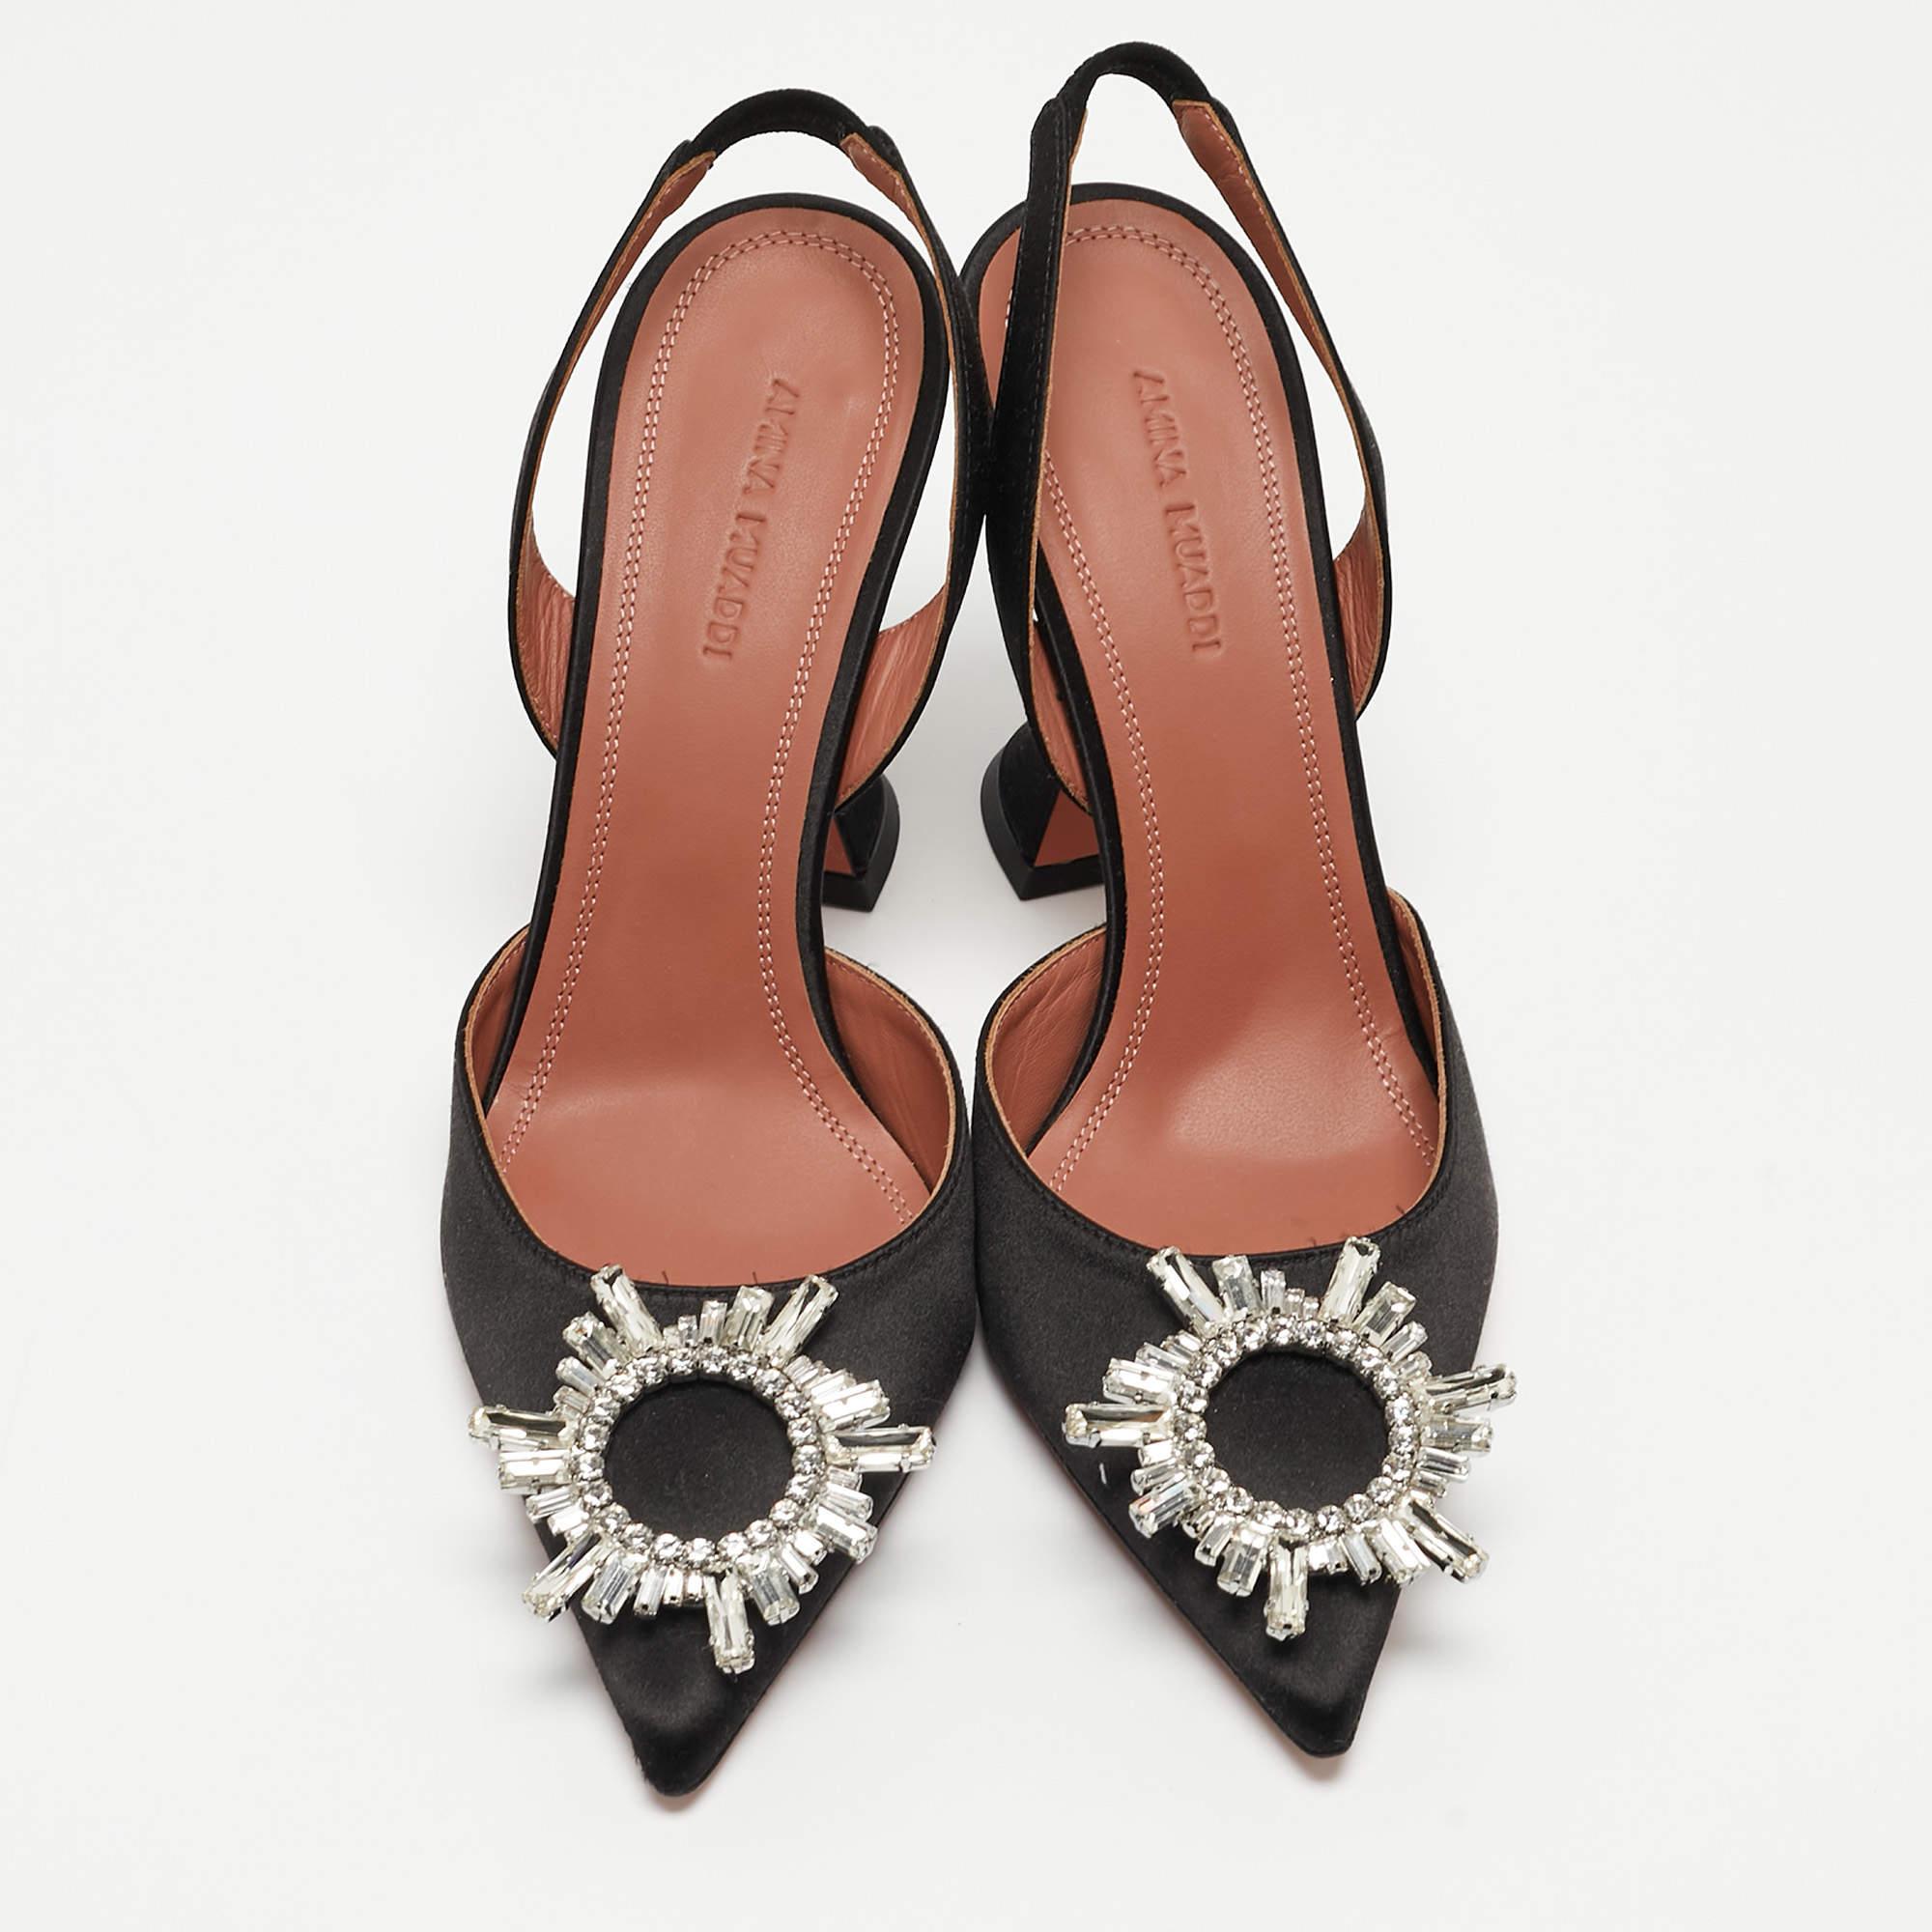 Innovative and timeless, this pair of Amina Muaddi pumps are a modern take on fairy-tale shoes. The architectural silhouette of the pair is balanced on fluted heels and the crystal-embellished butterfly bow design decorates its front. Crafted from